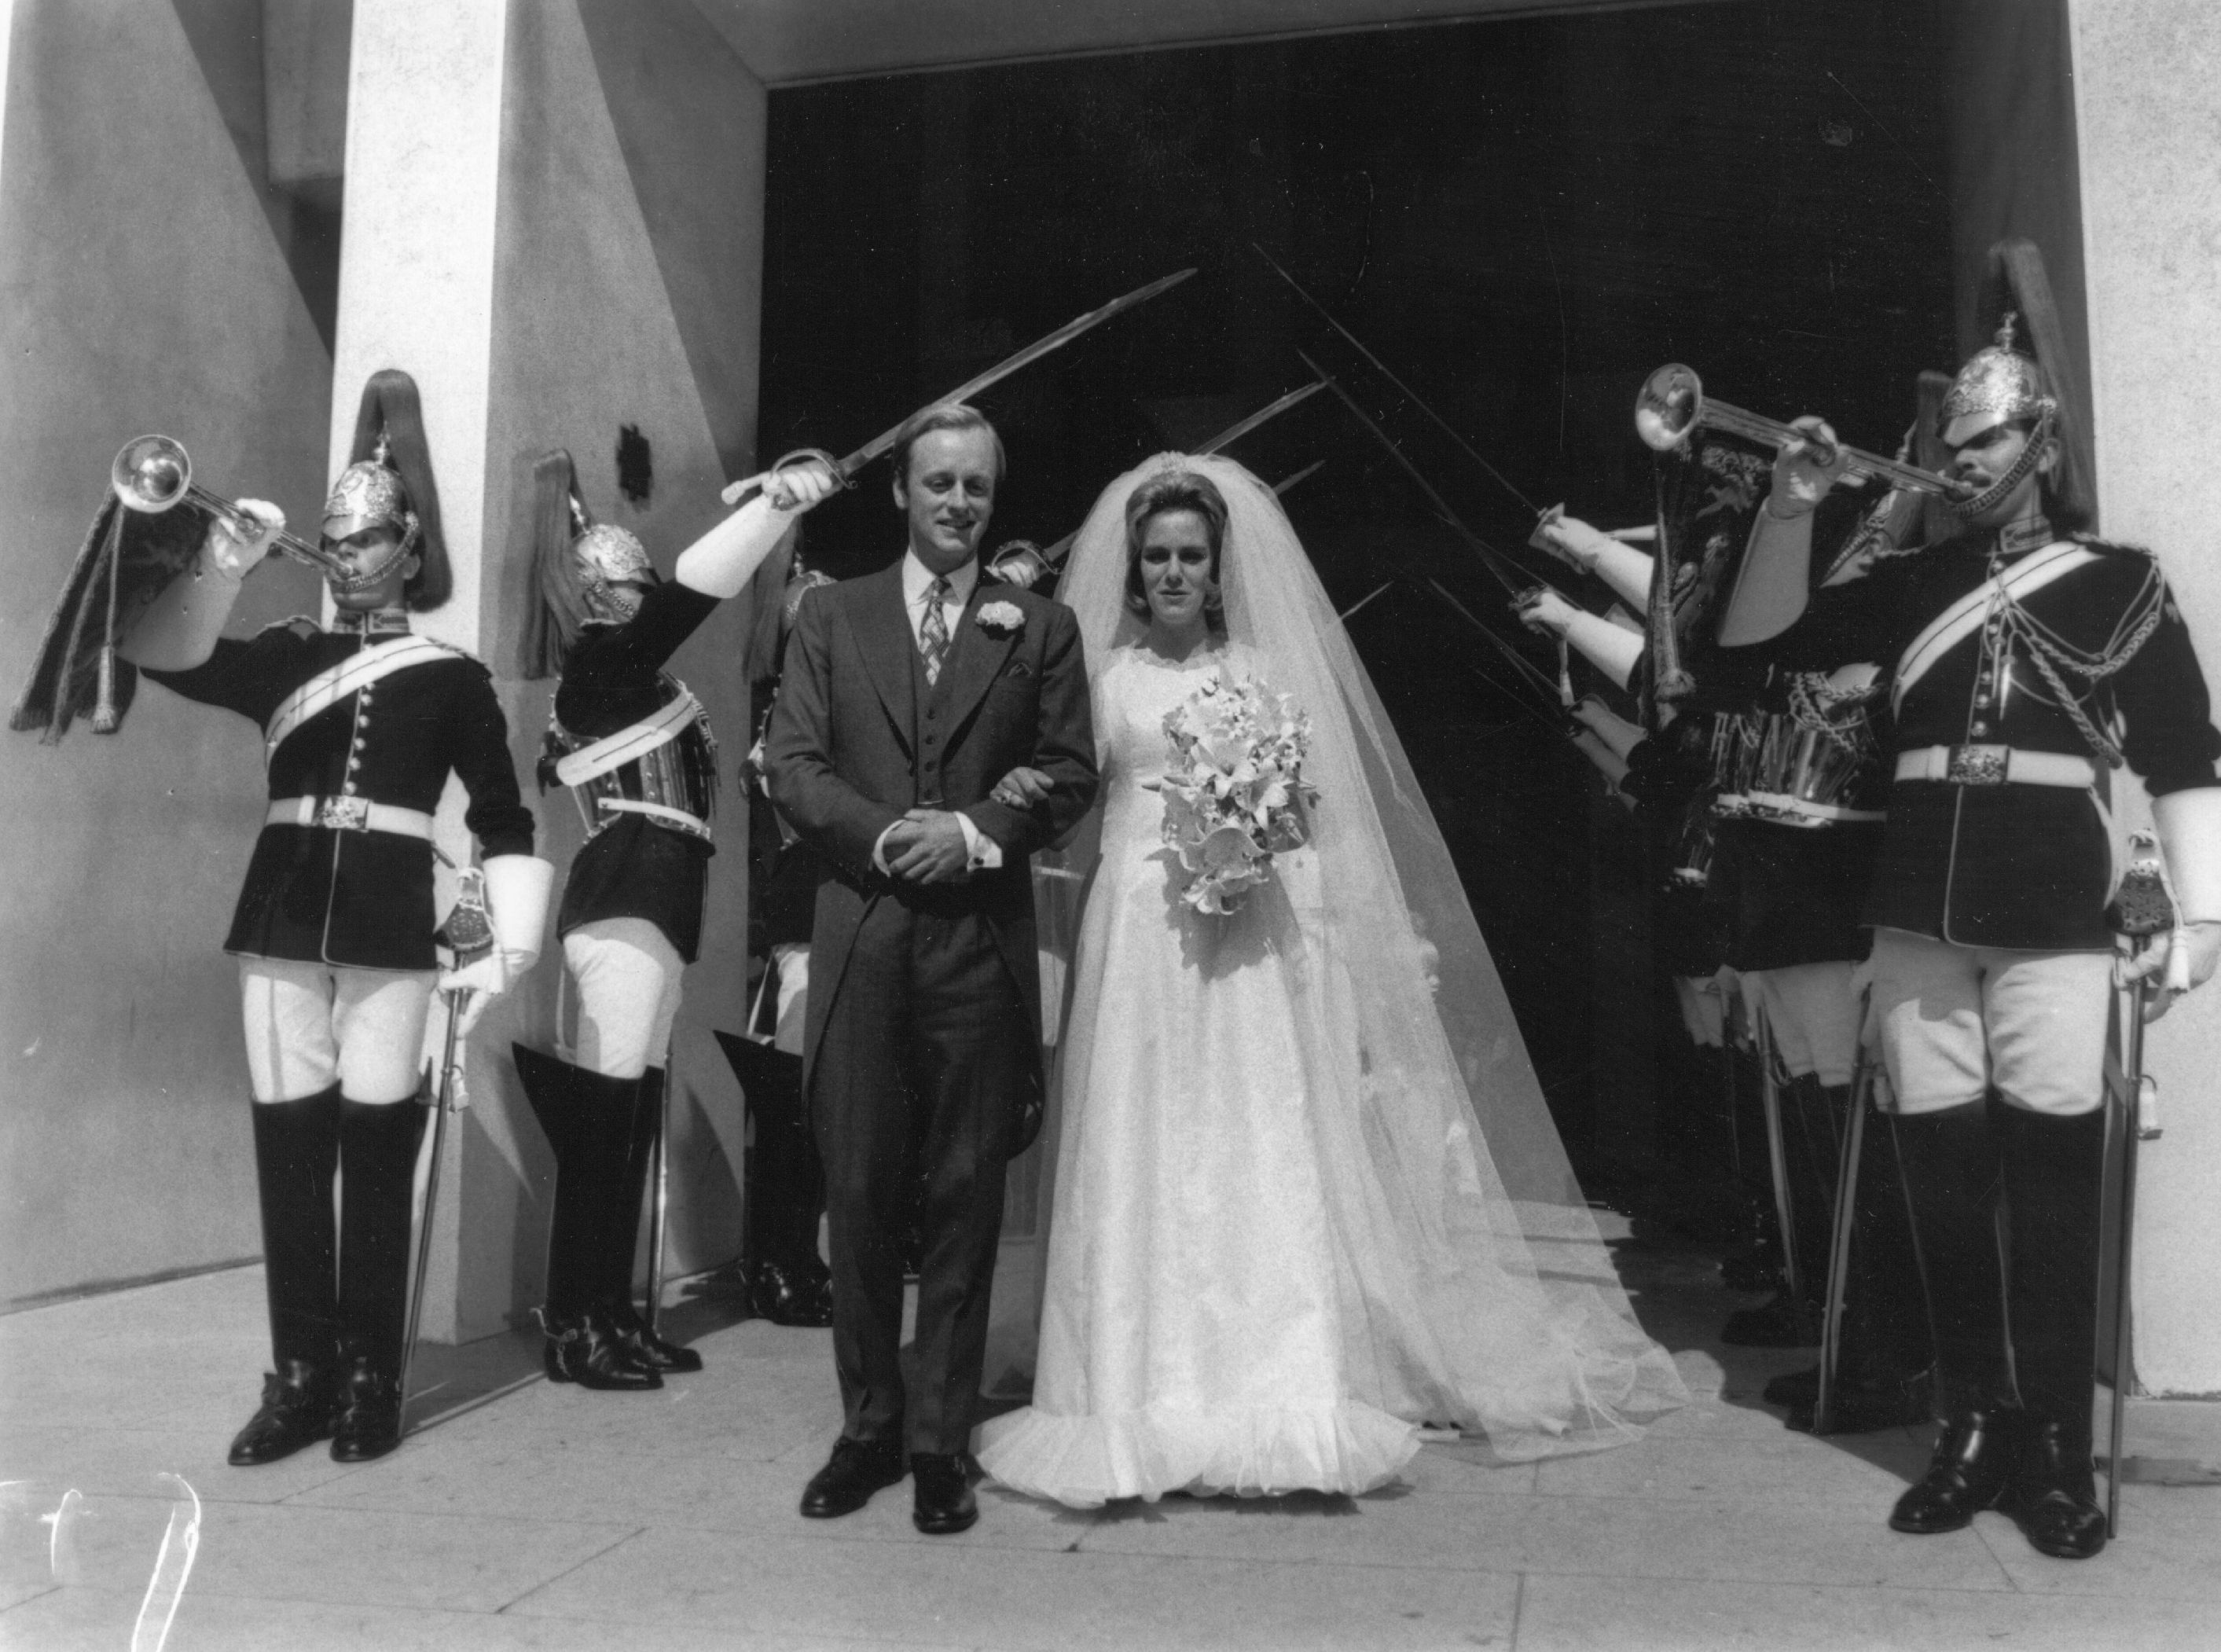 The wedding of Andrew Parker-Bowles and Camilla Queen Consort at the Guard's Chapel, London, on July 4, 1973. | Source: Getty Images